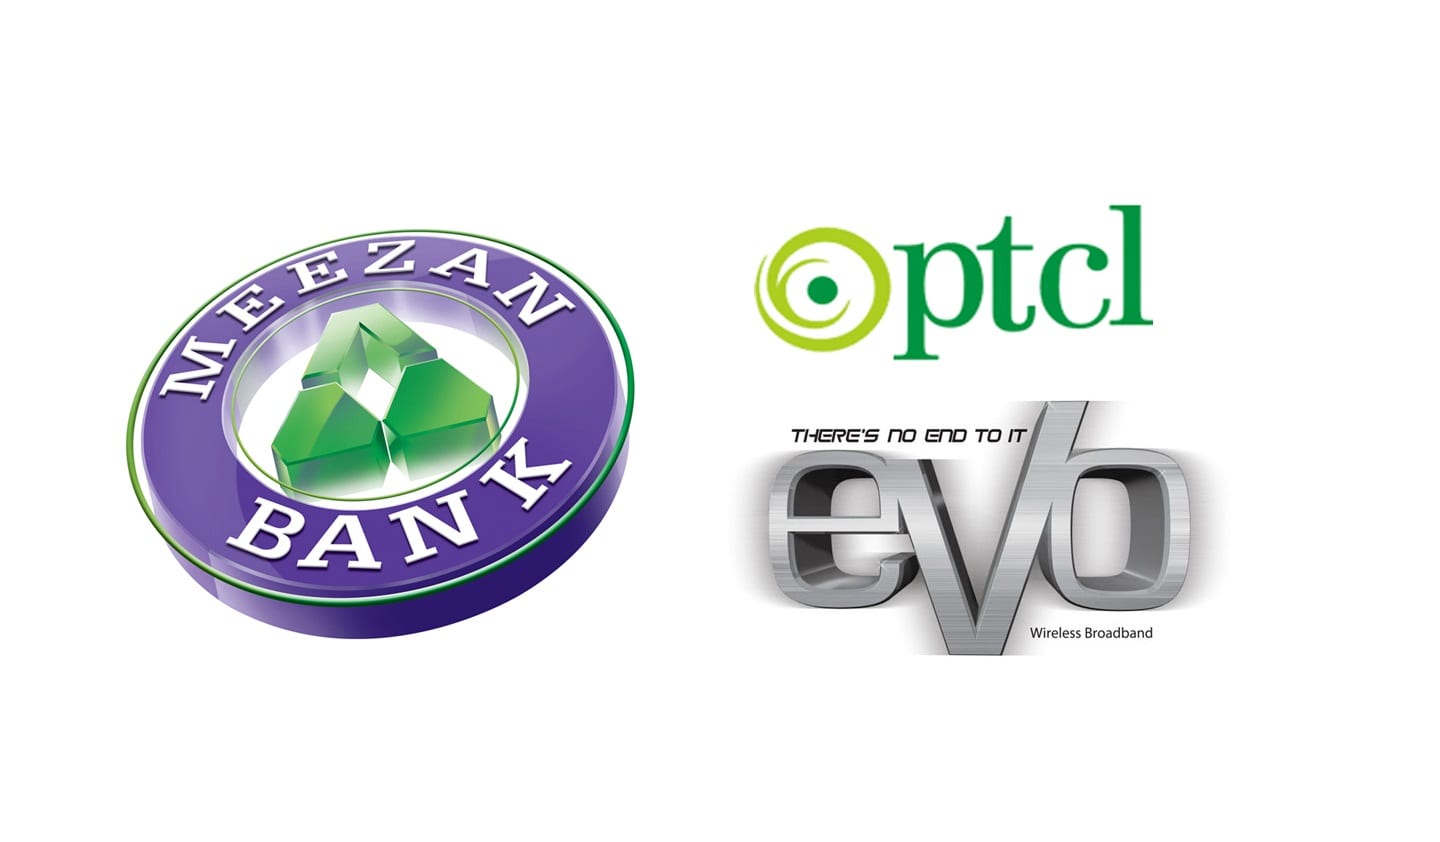 PTCL & Meezan Bank Signed a Deal for EVO Services